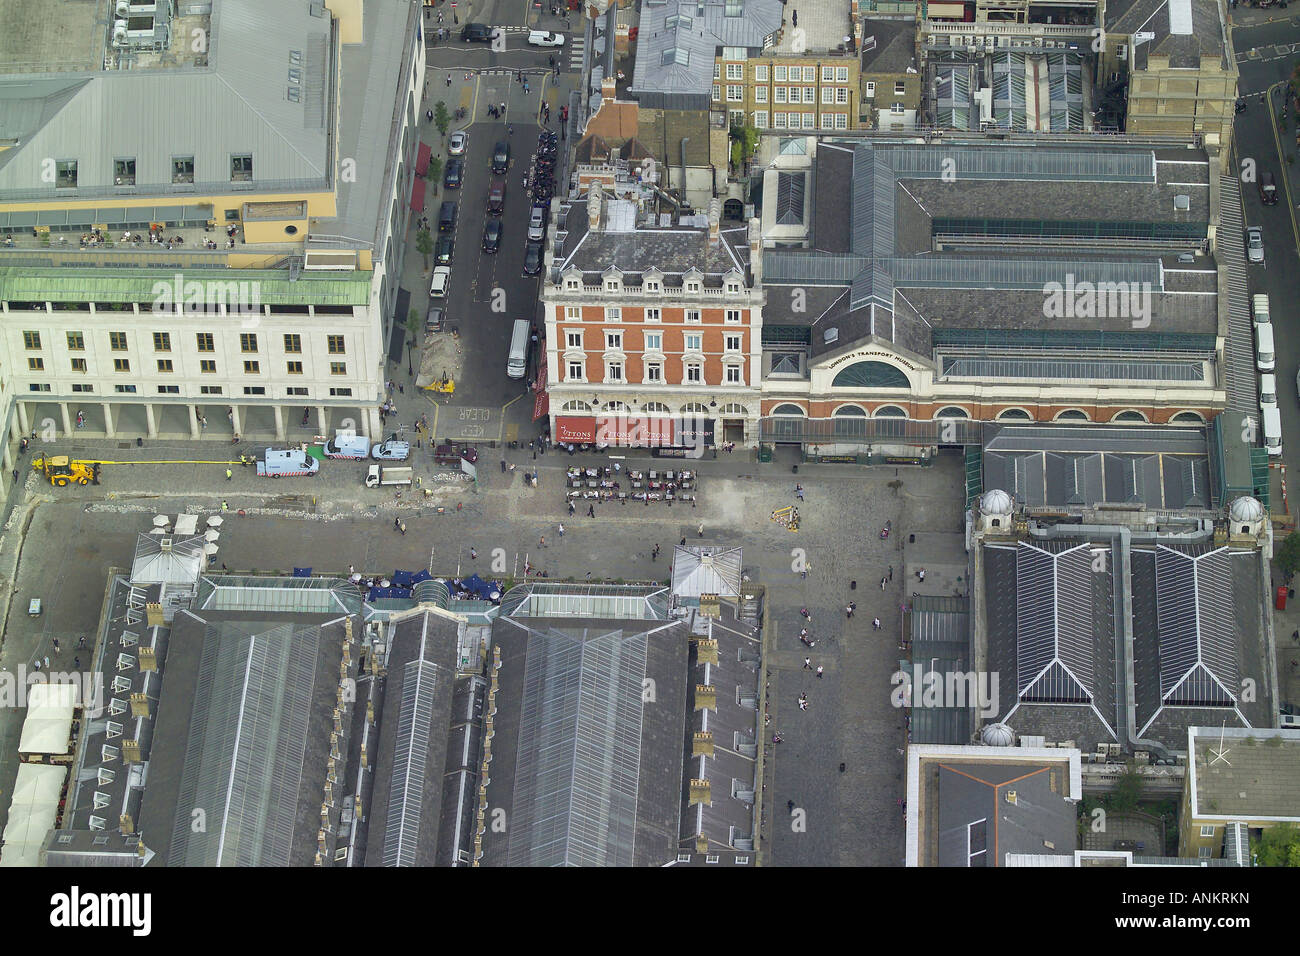 Aerial view of a Street Cafe outside London's Covent Garden Market surrounded by utilities work Stock Photo